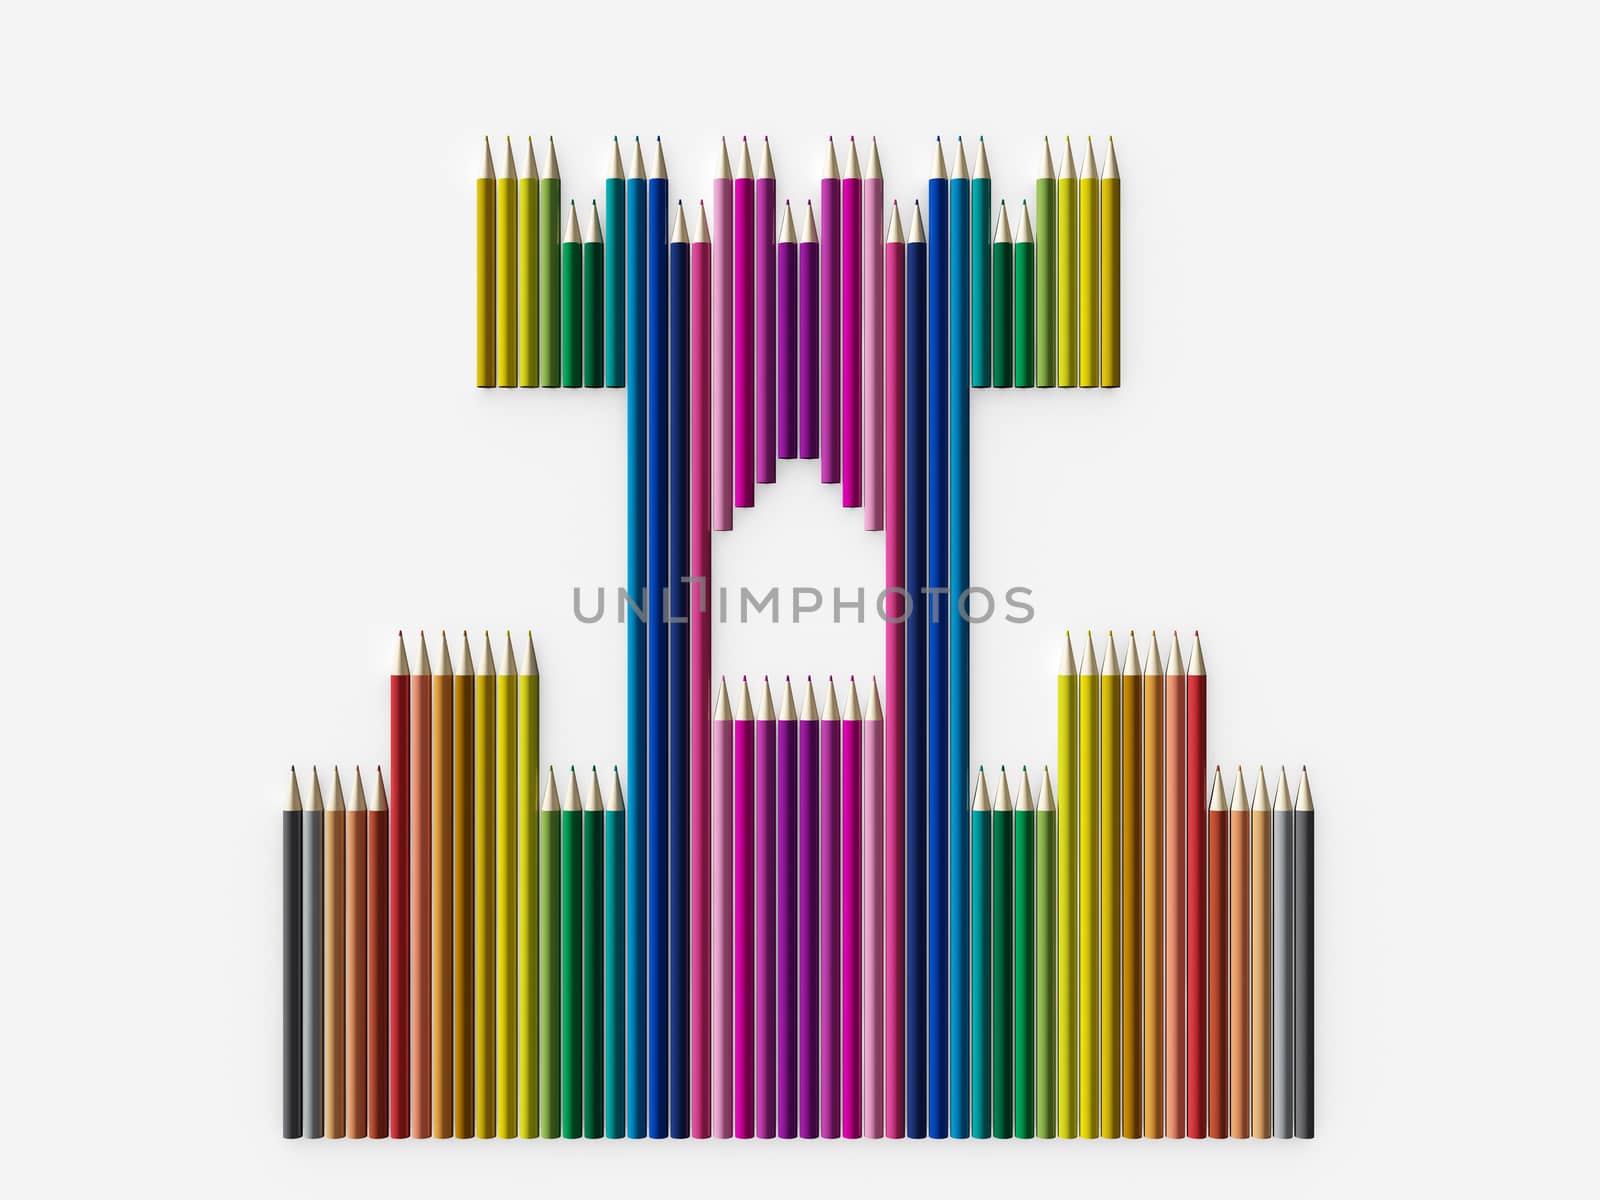 Colored pencils arranged in a castle by teerawit